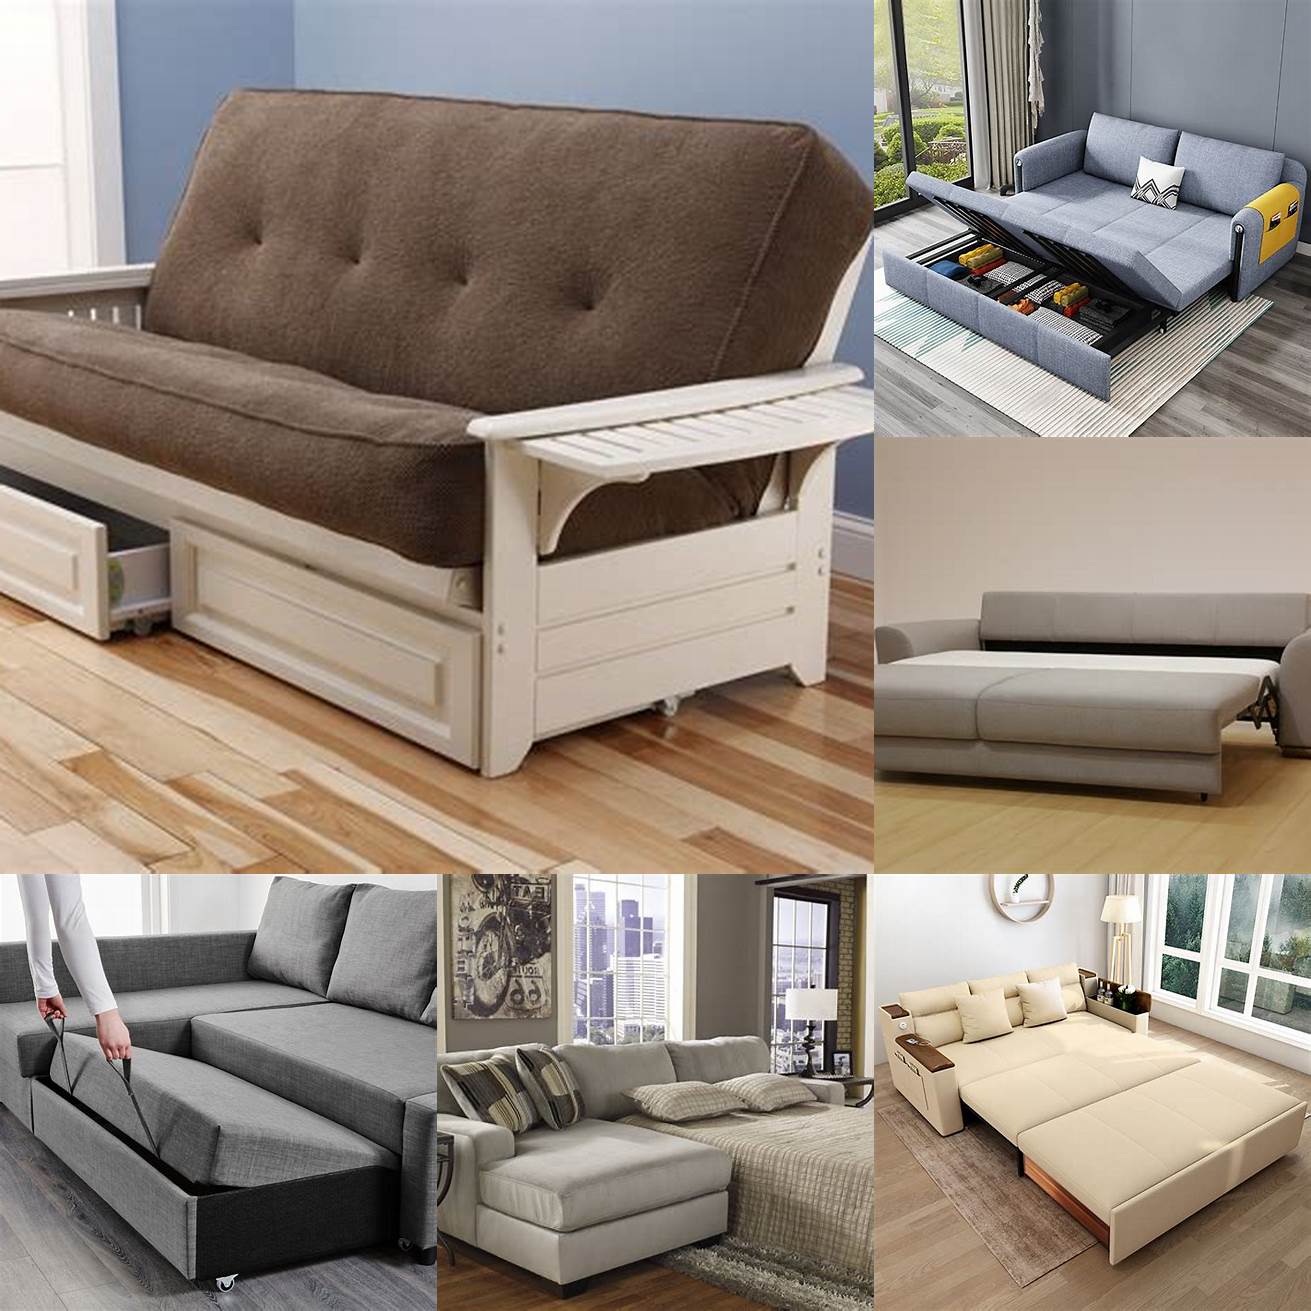 A King Size Sofa Bed with built-in storage for extra functionality